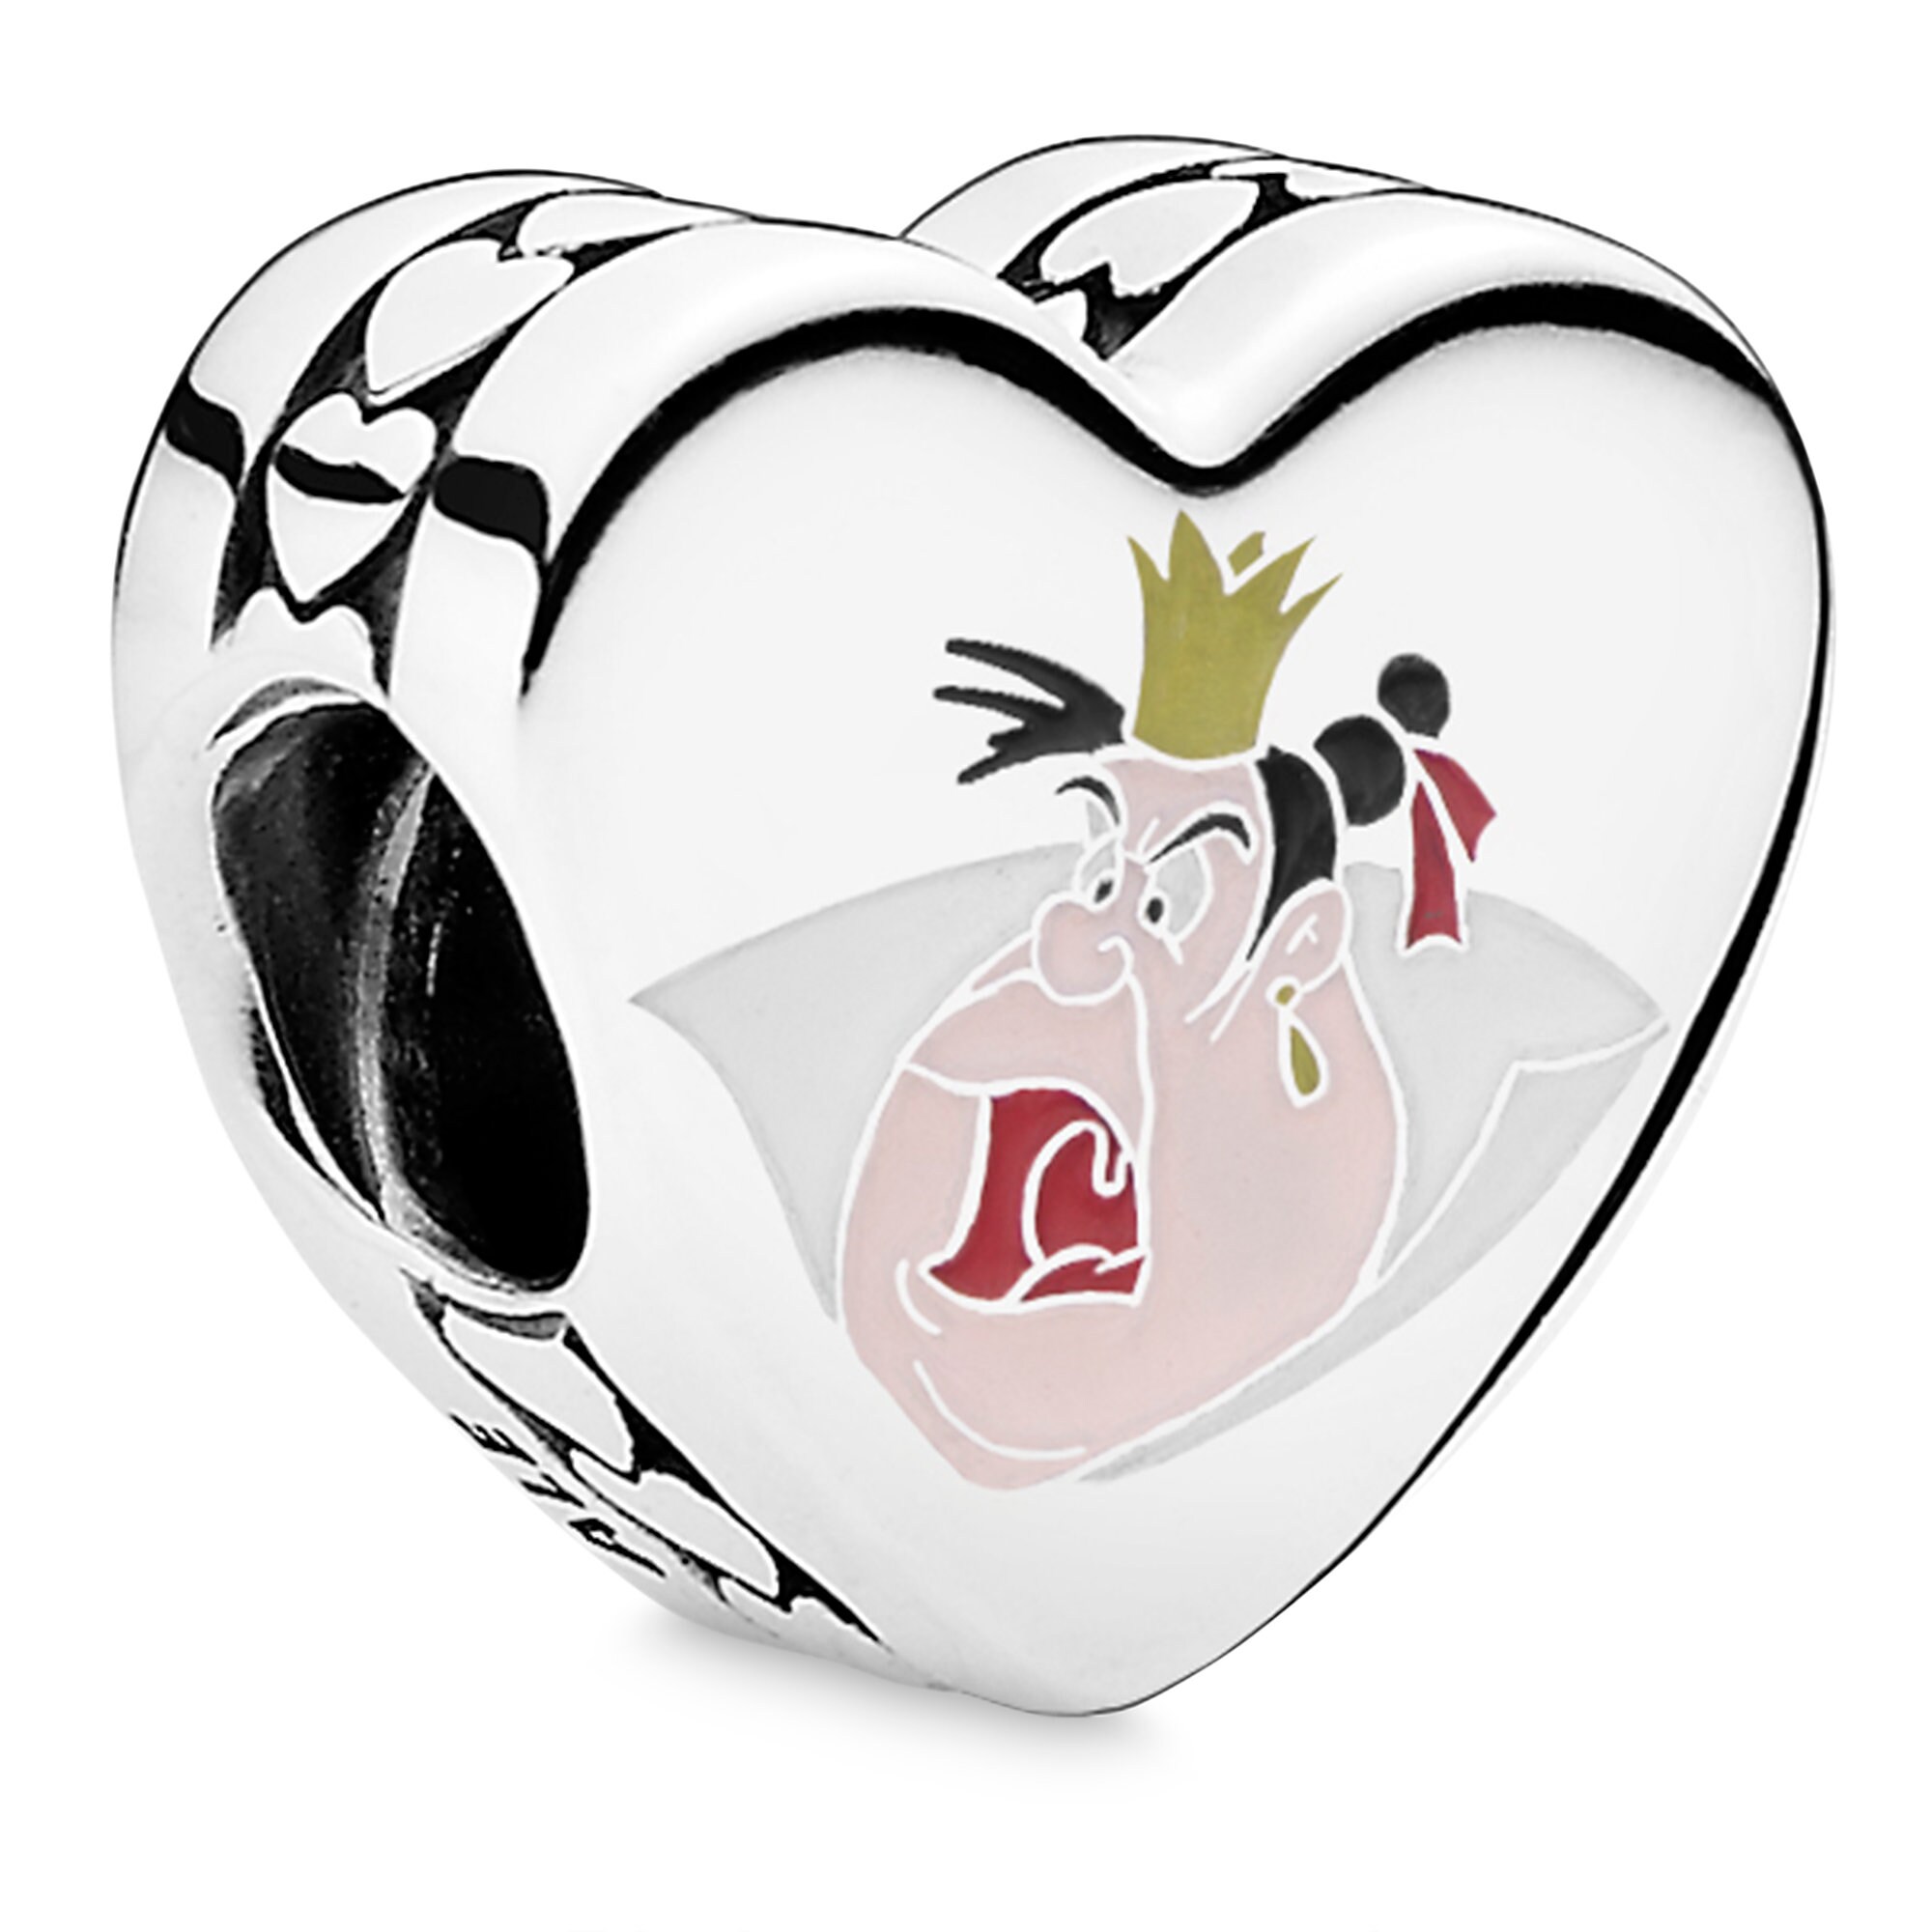 Disney Villains Charm Set by Pandora Jewelry now available